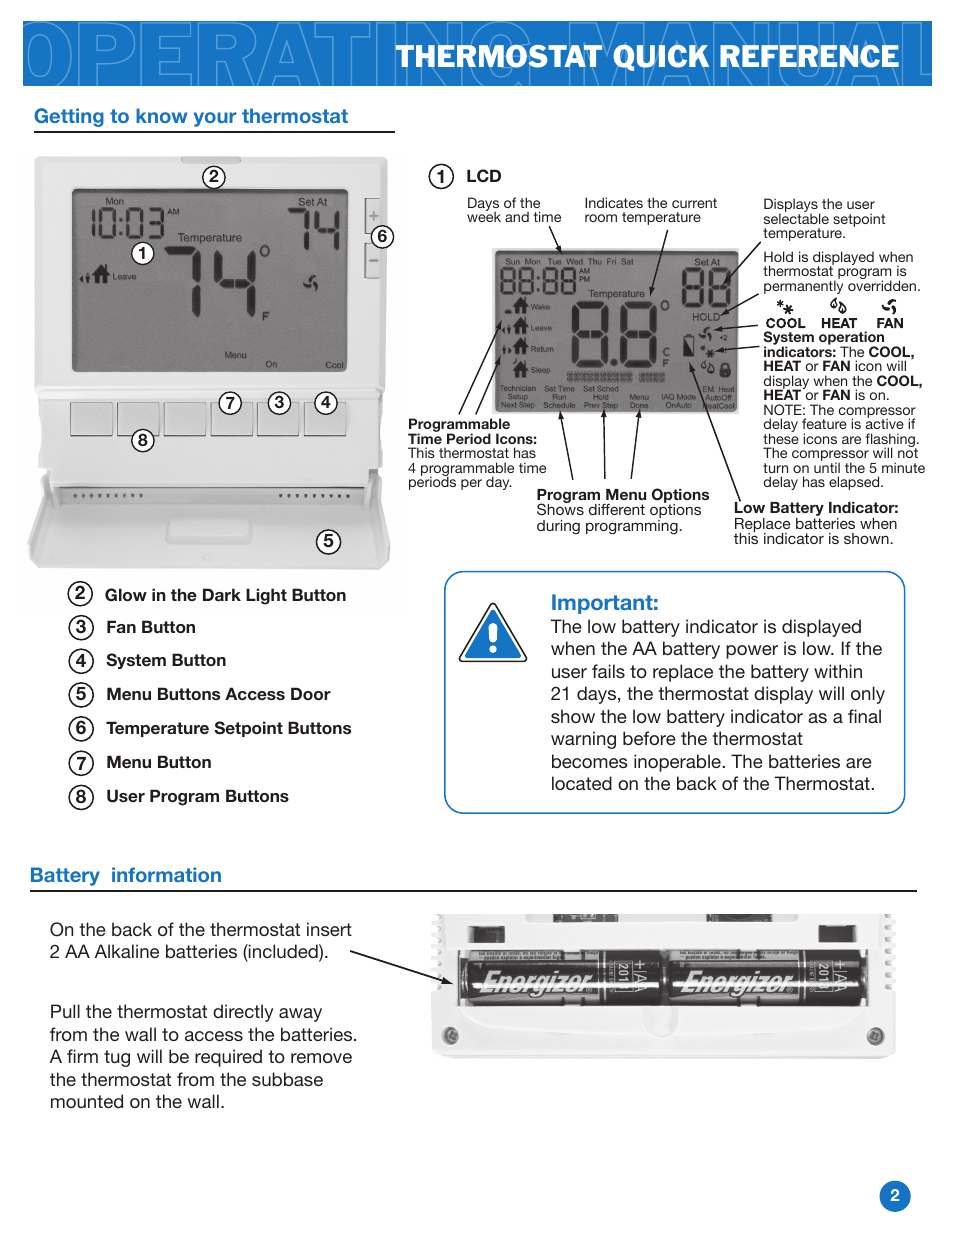 Thermostat quick reference, Important, Battery information | Pro1 T805